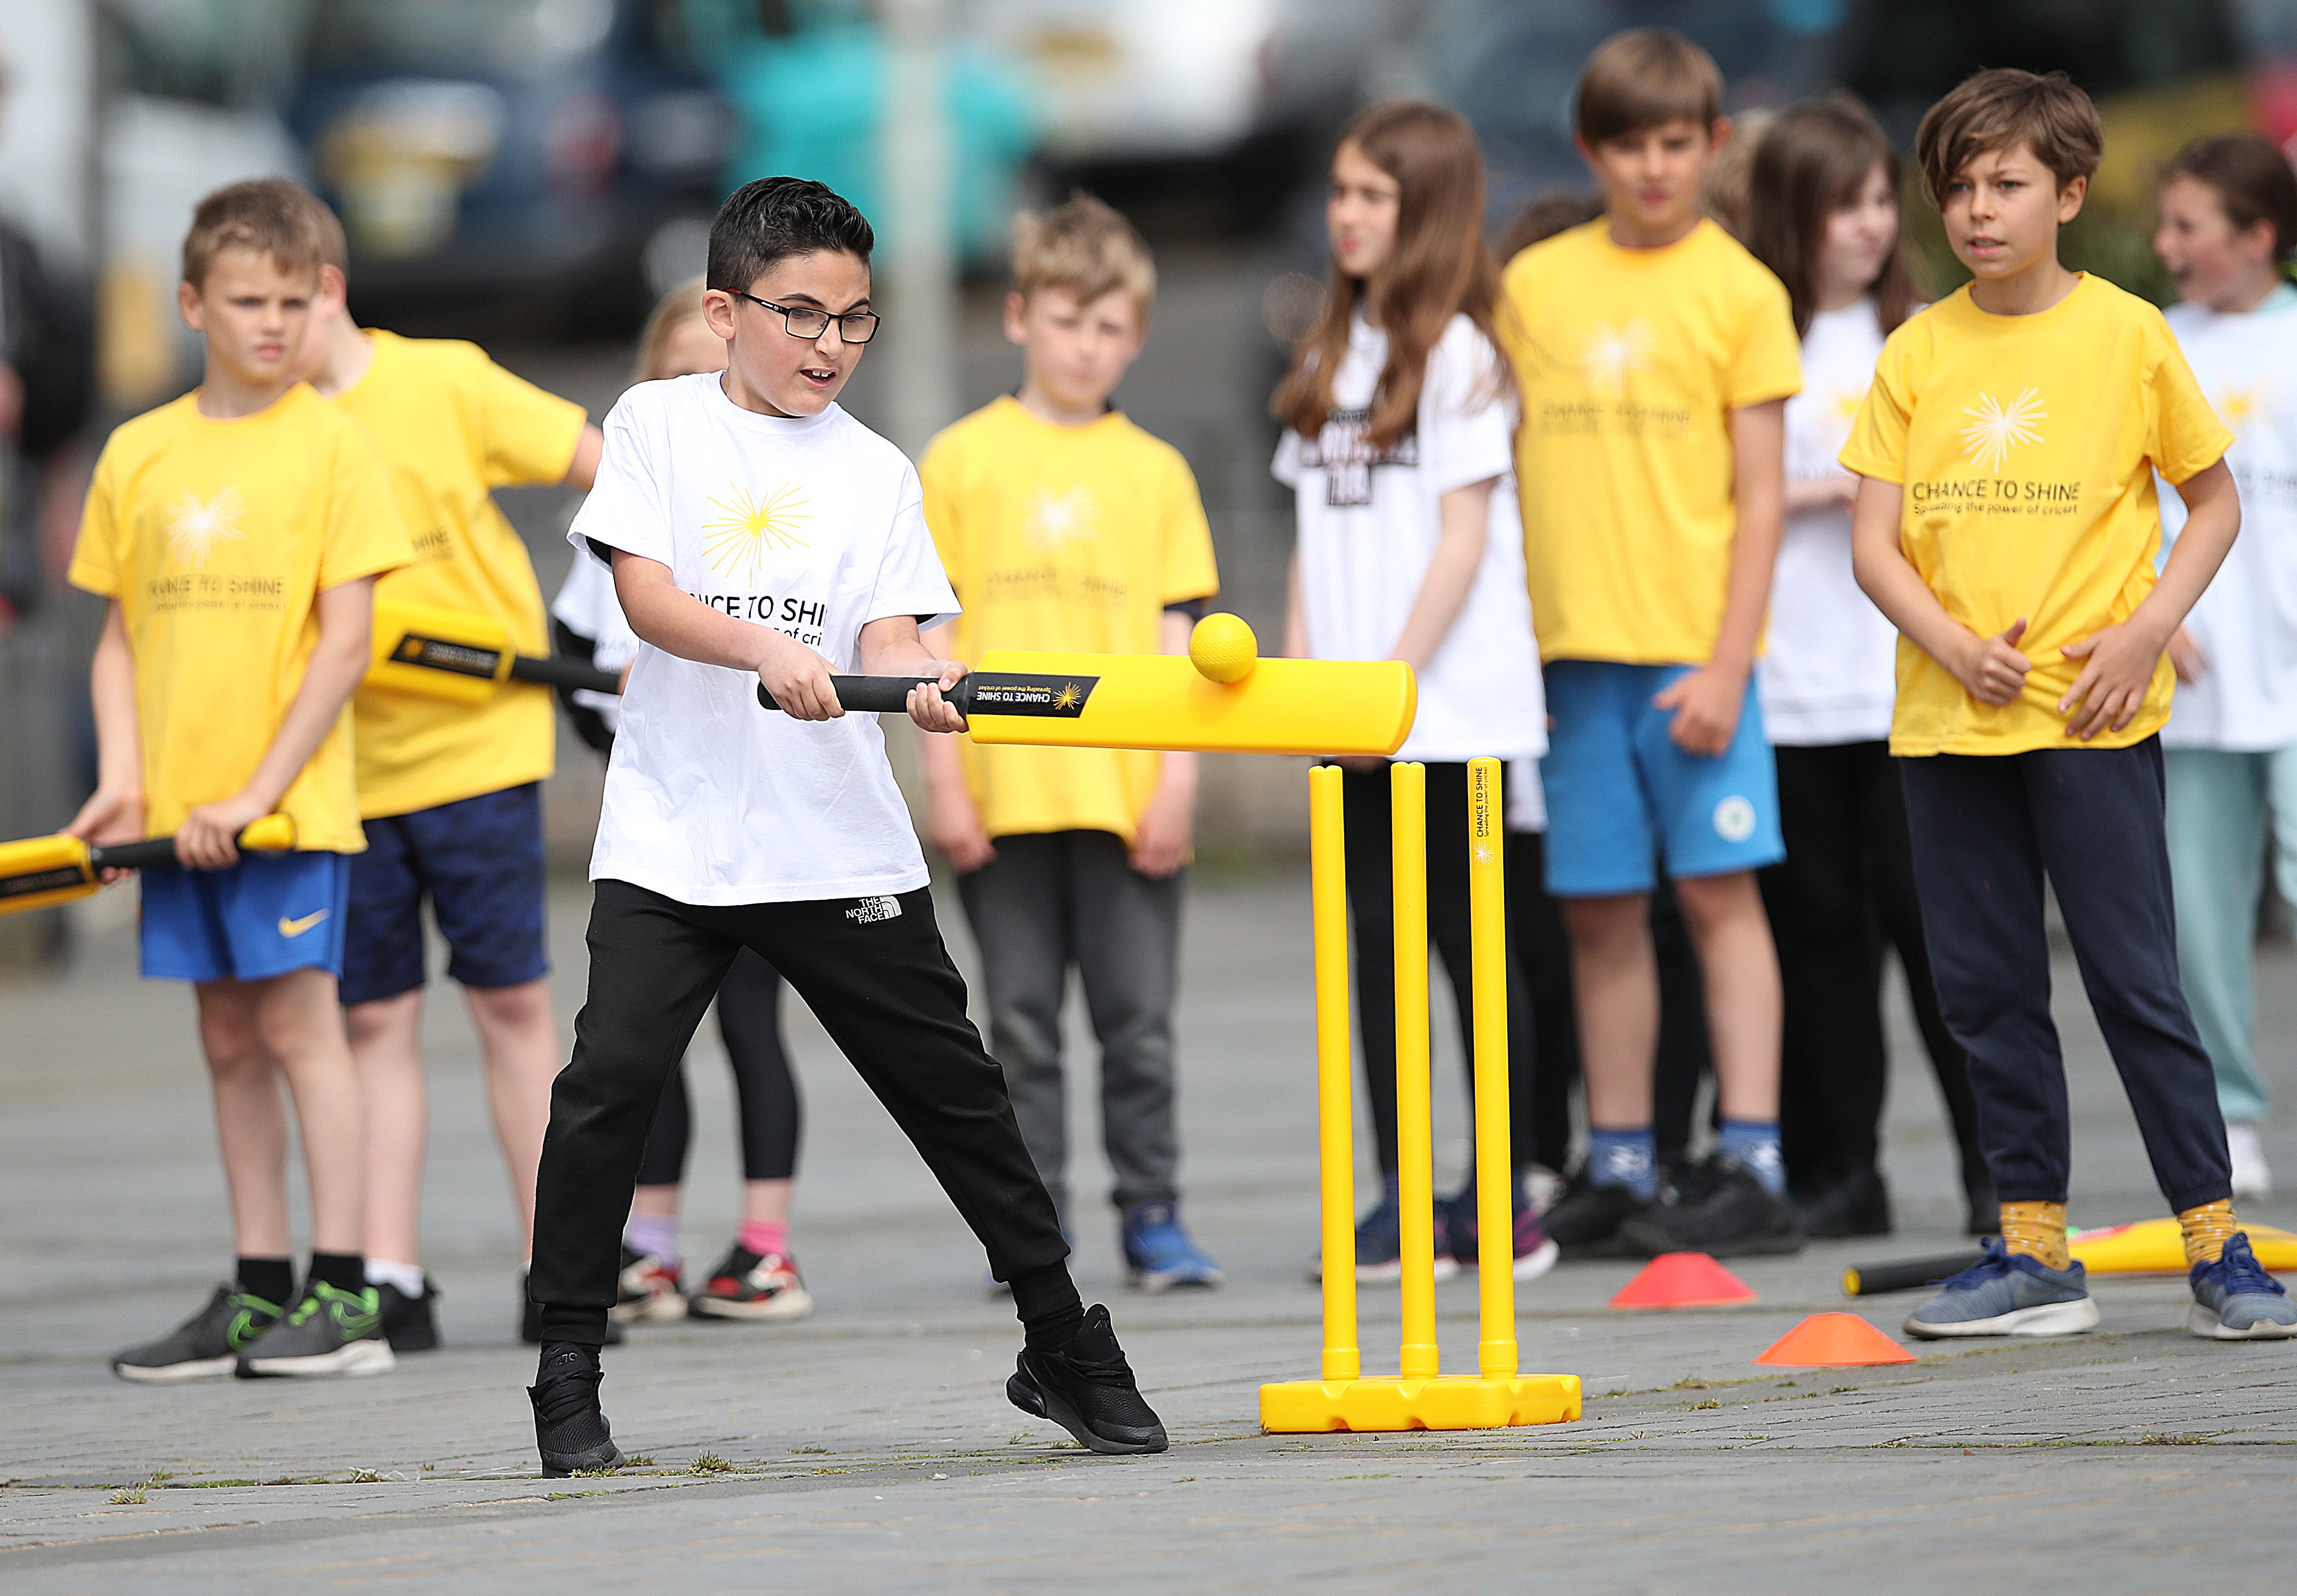 The Prime Minister has announced a big investment in grassroots cricket